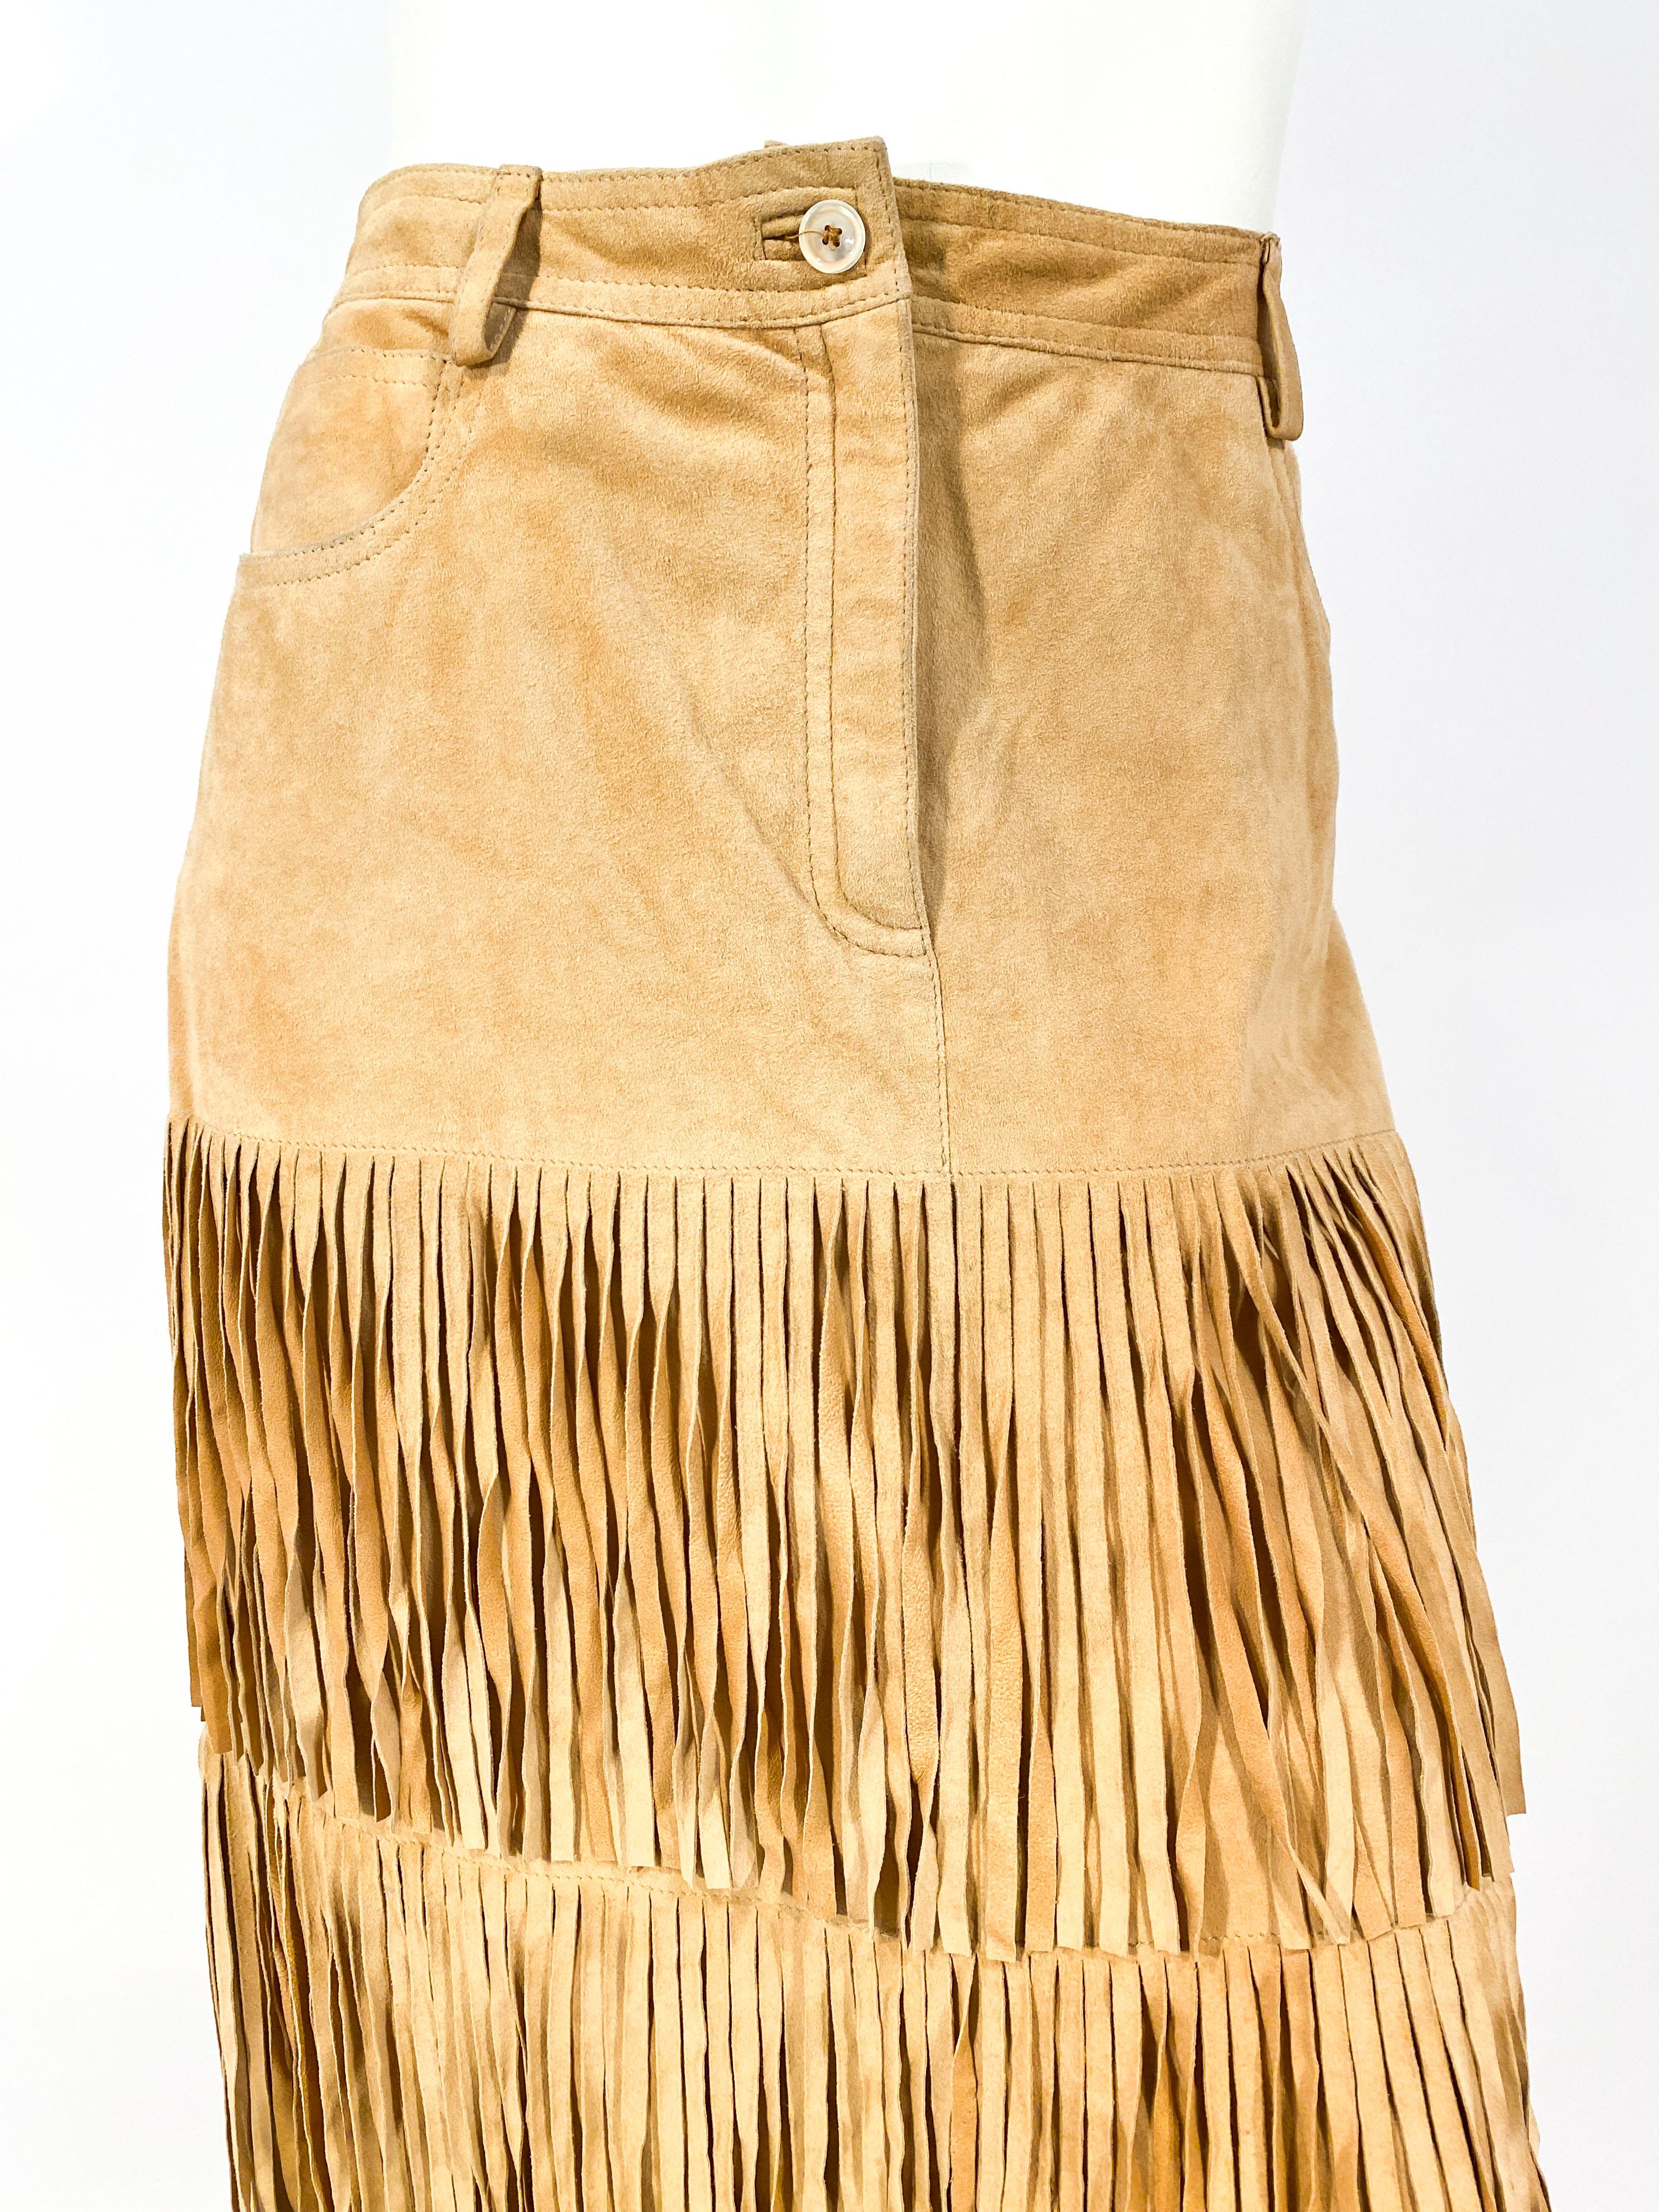 1990's' Moschino suede skirt featuring three long tiers of fringe that drop bellow the knee. The lining in the interior is to the knee and there is a back kick pleat. There are several front and back pockets and has attached belt loops for a belt. 